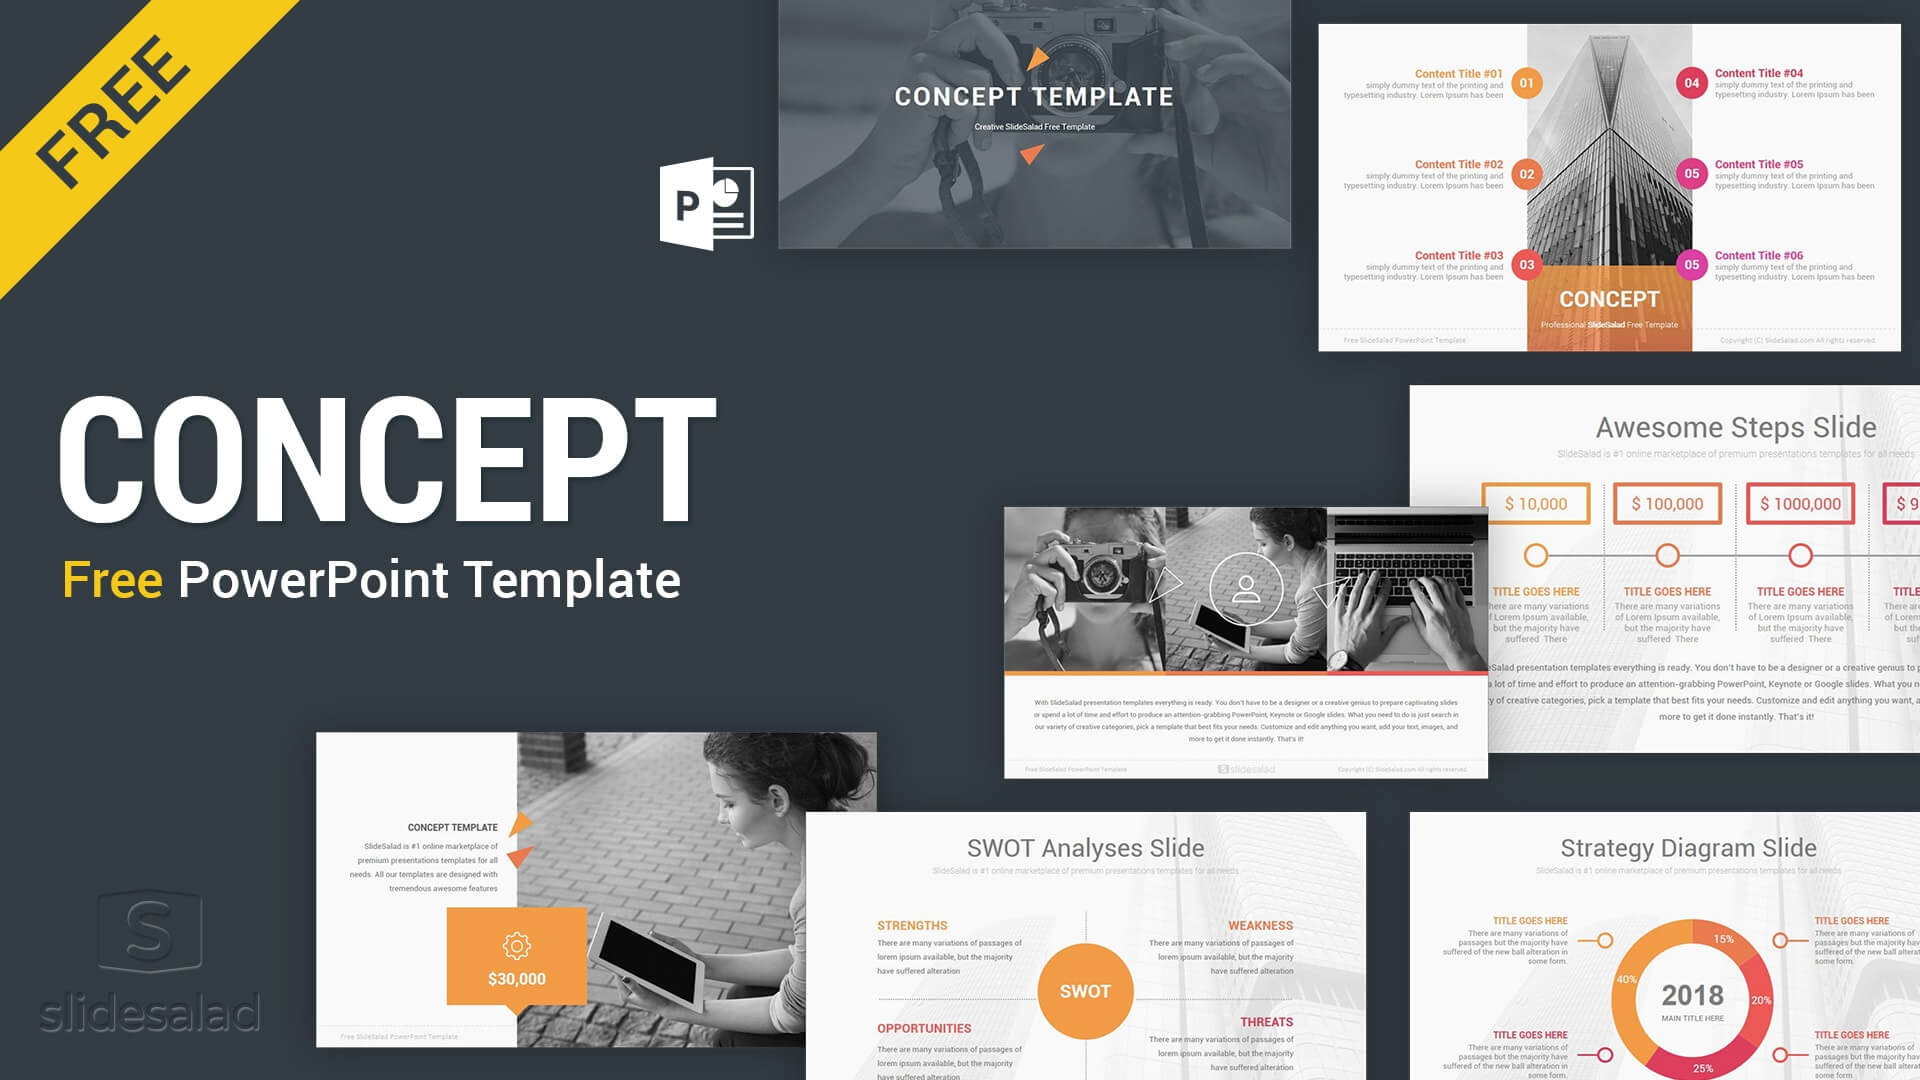 Best Free Presentation Templates Professional Designs 2019 Intended For Virus Powerpoint Template Free Download